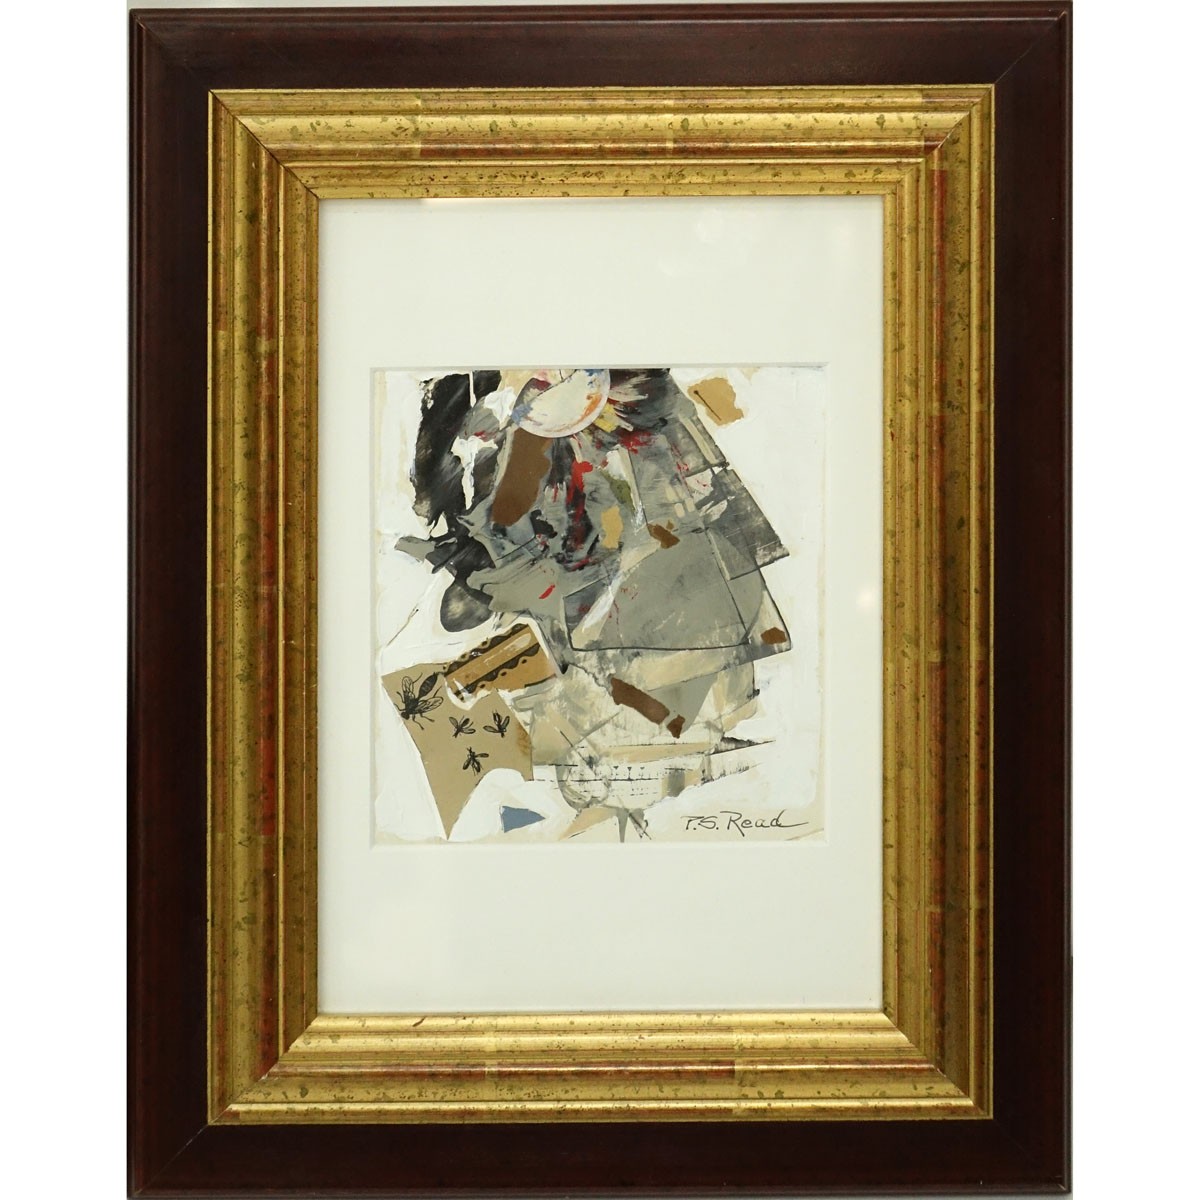 Philip Standish Read, American (1927 - 2000) Mixed Media Collage, Untitled Composition, Signed Lower Right. Good condition.